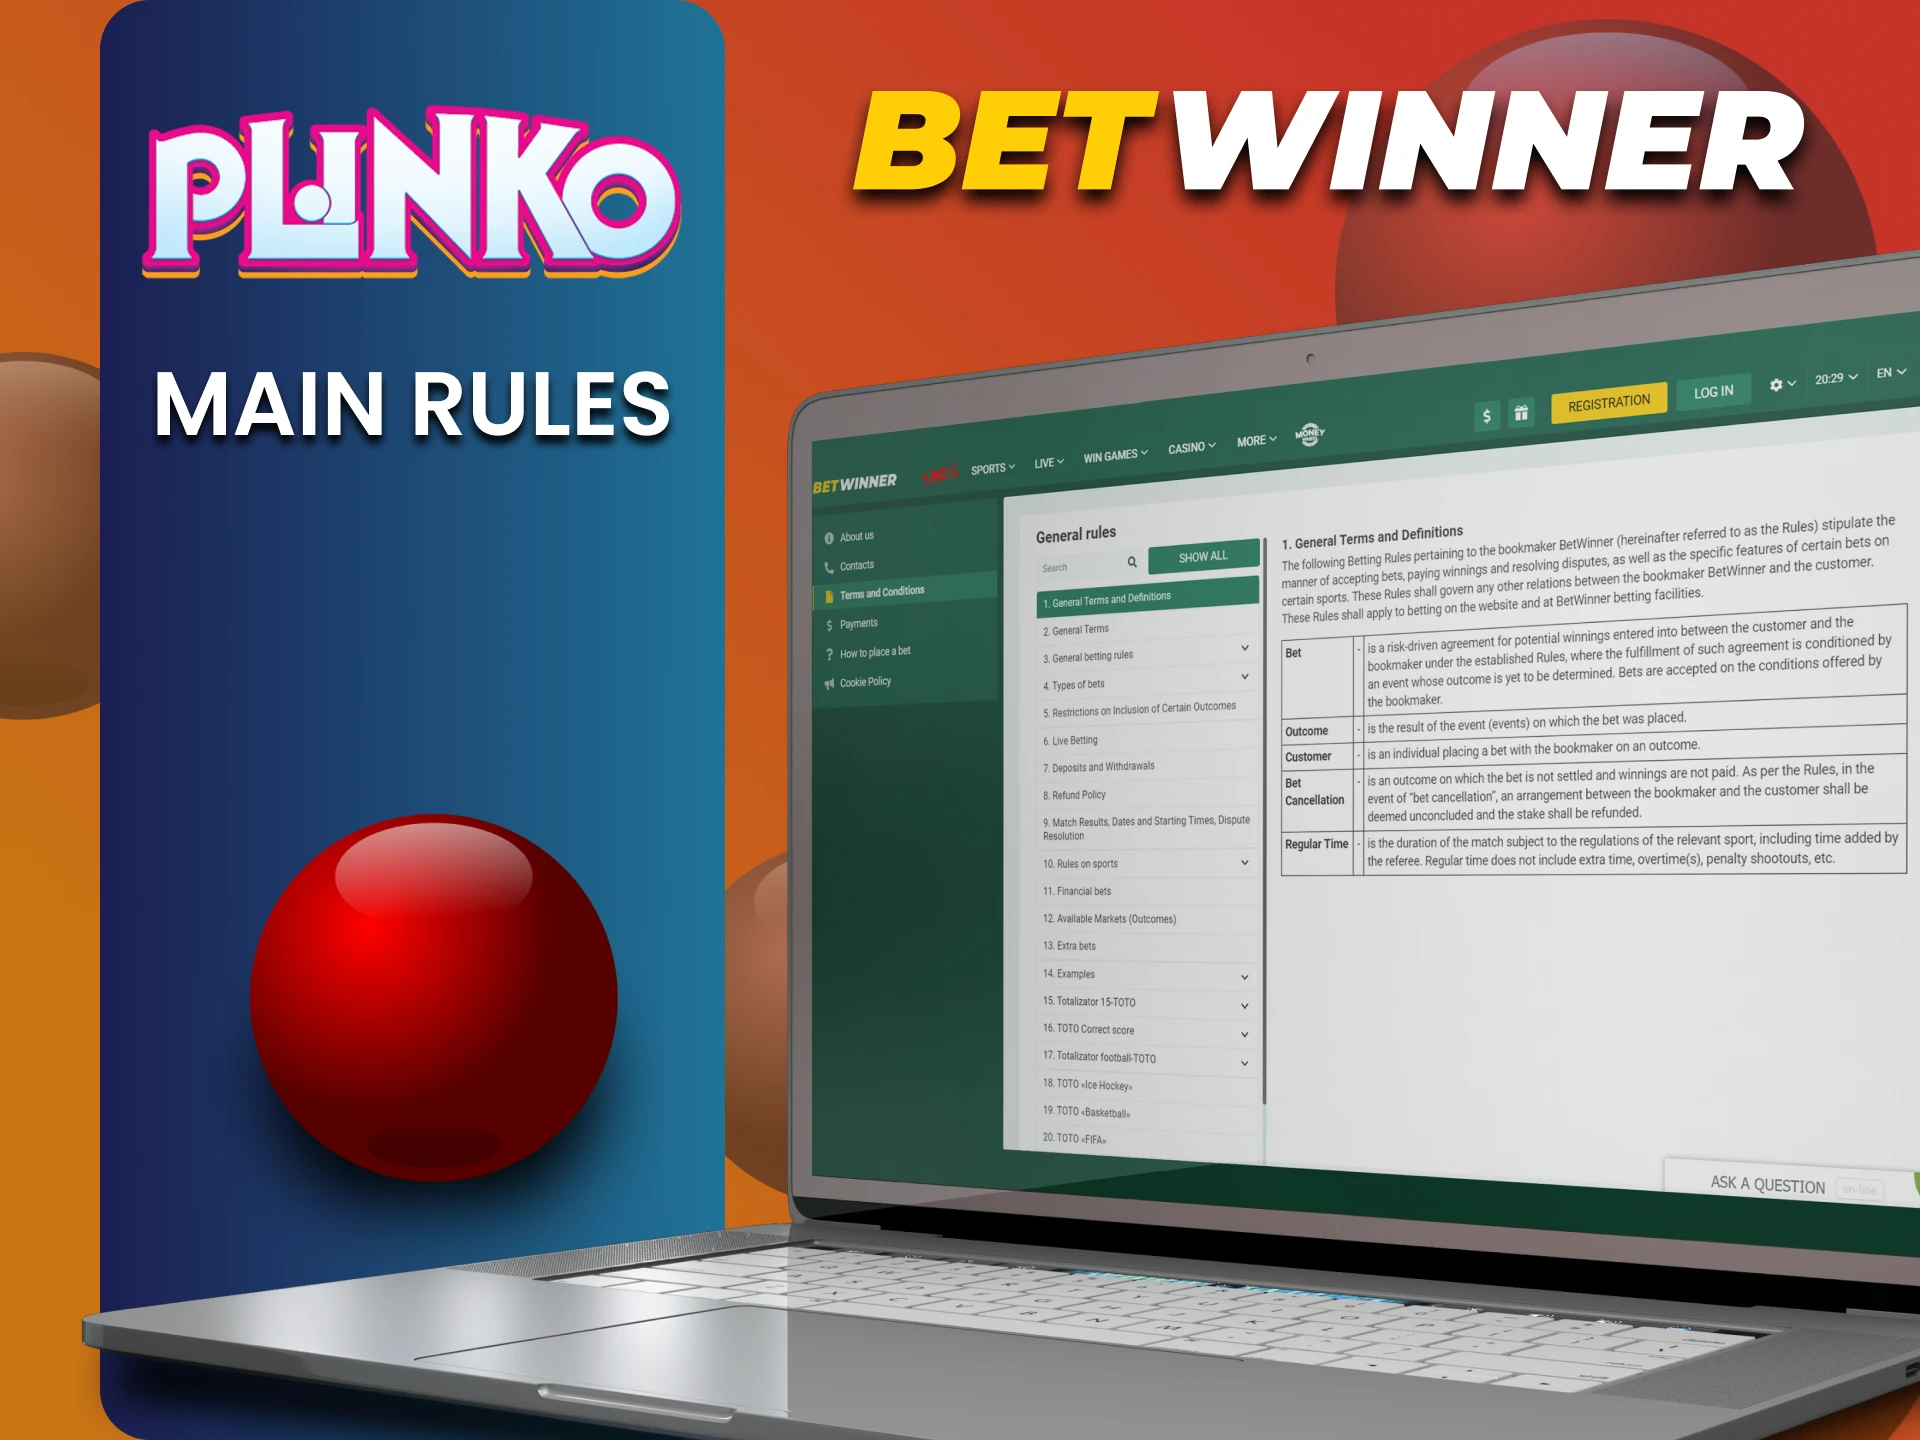 Learn the rules of the Betwinner service for playing Plinko.